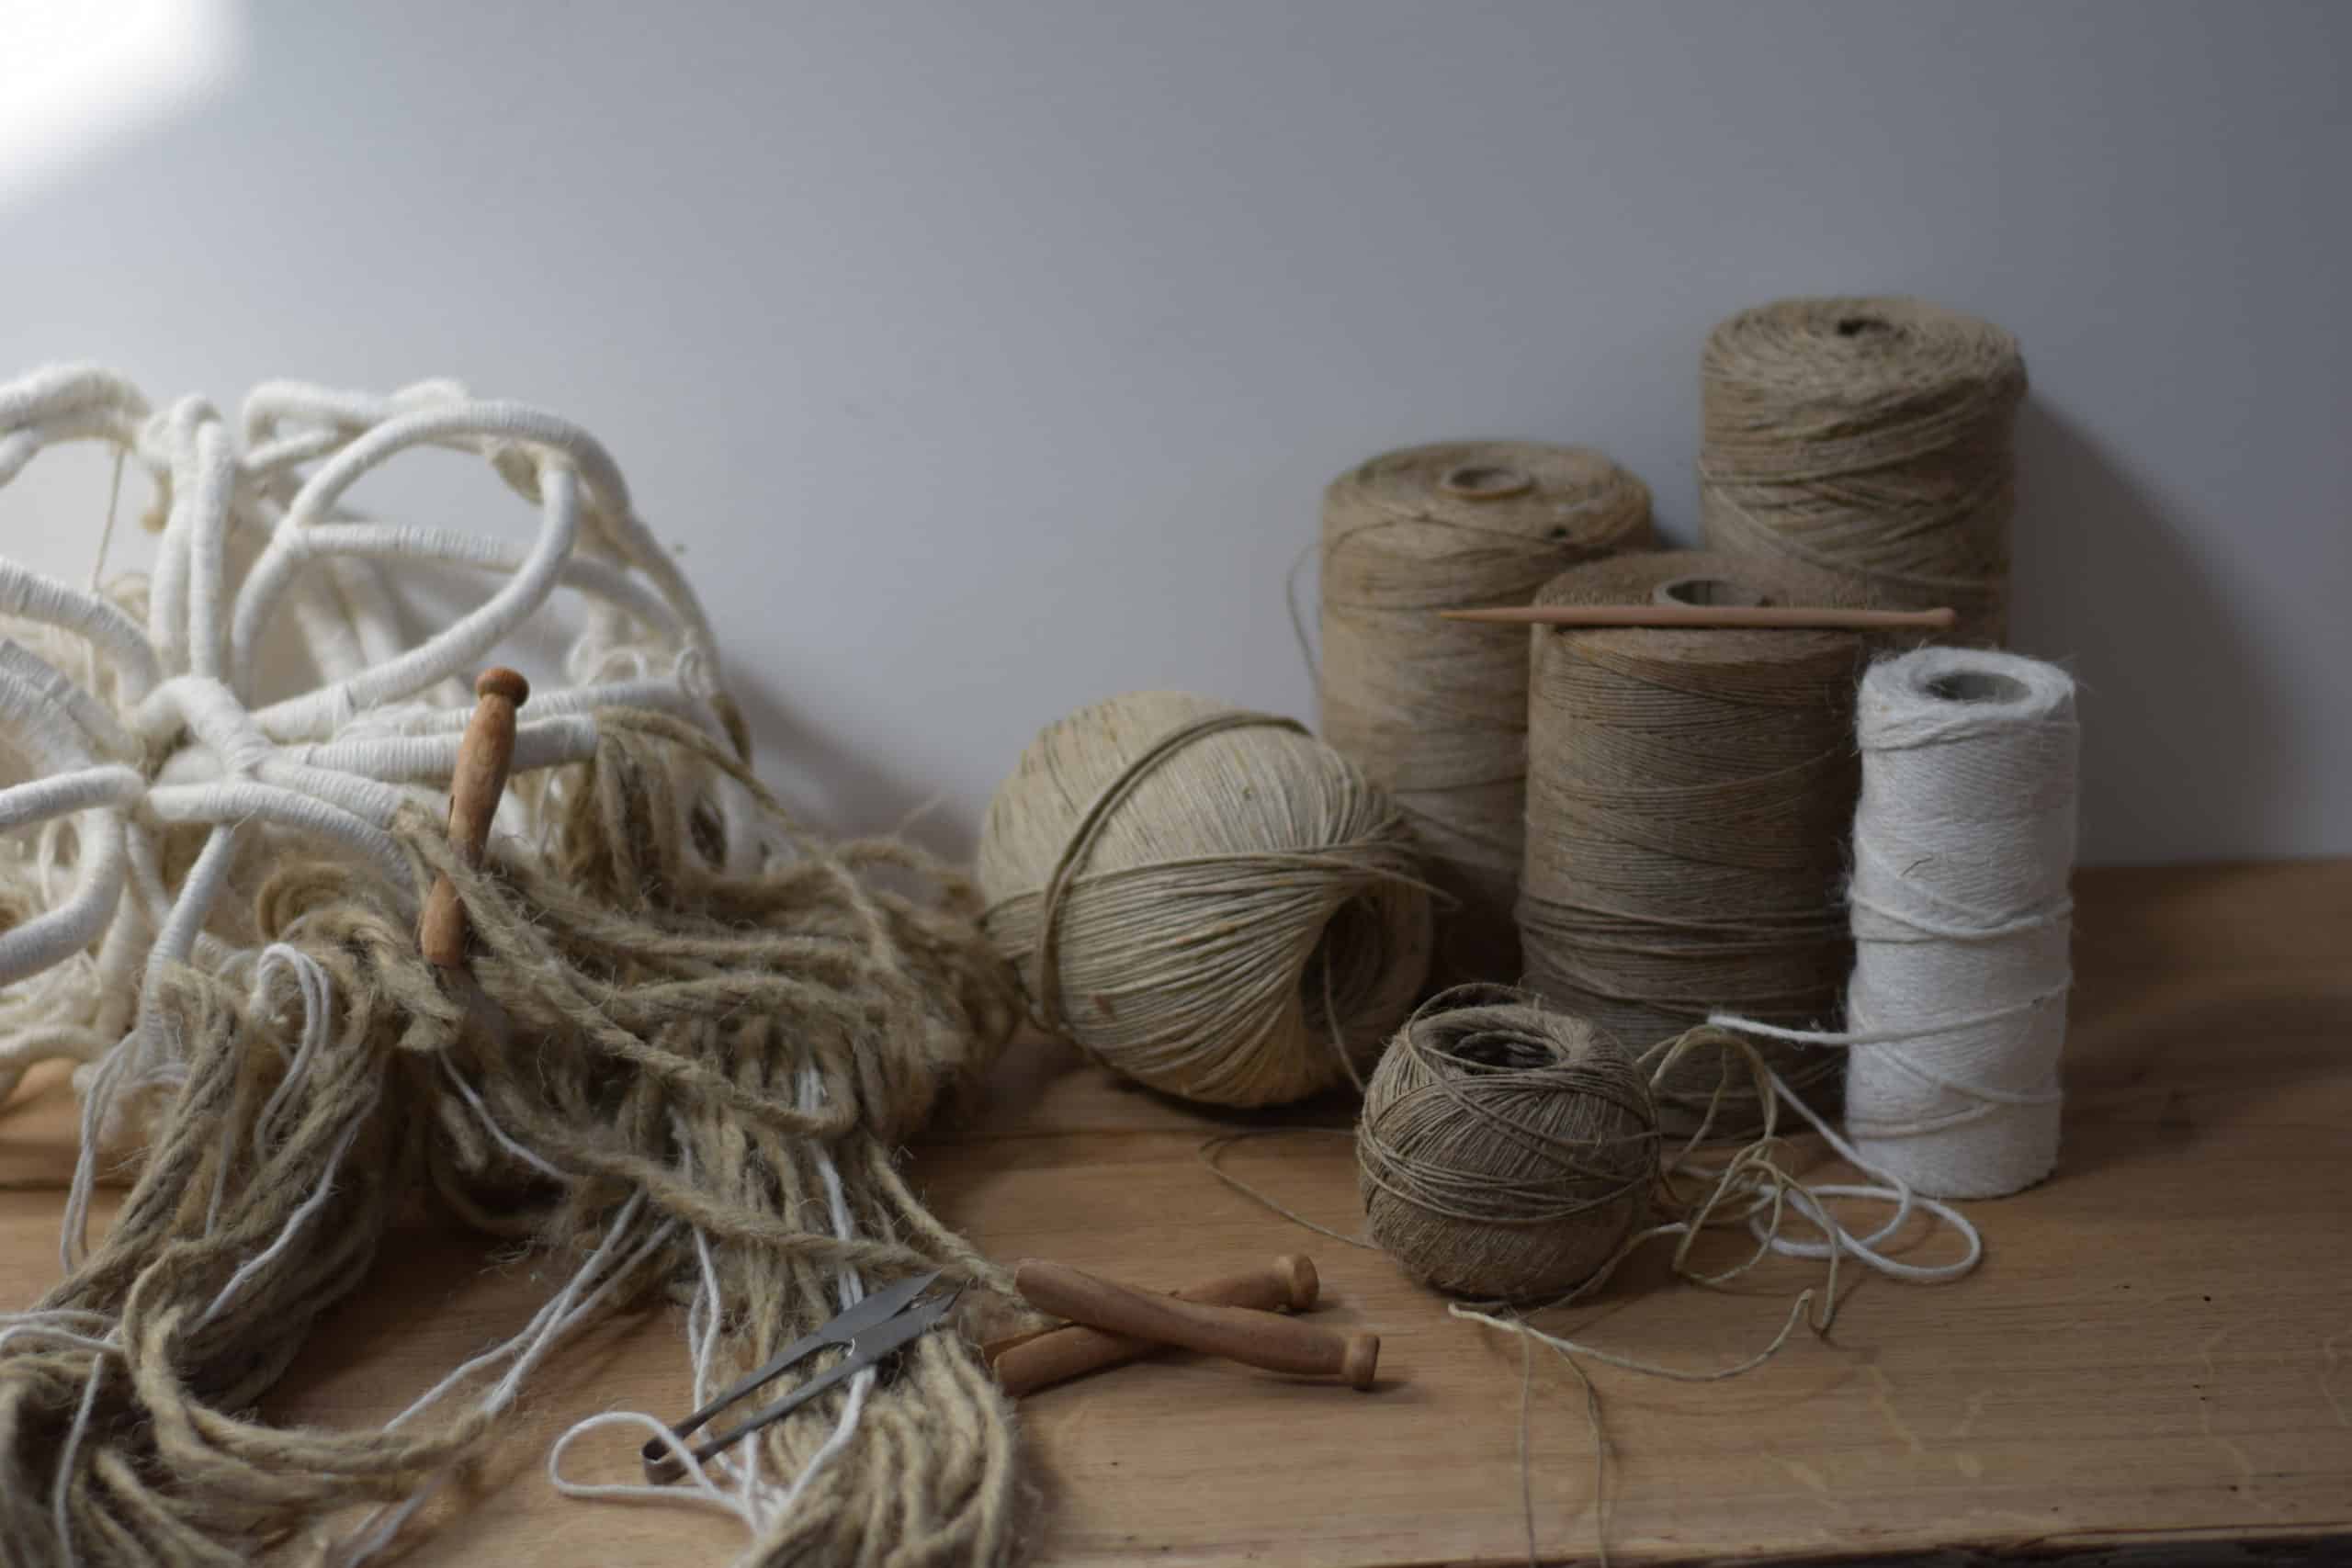 Linen string and fibres, are the raw materials for Aude's sculptures